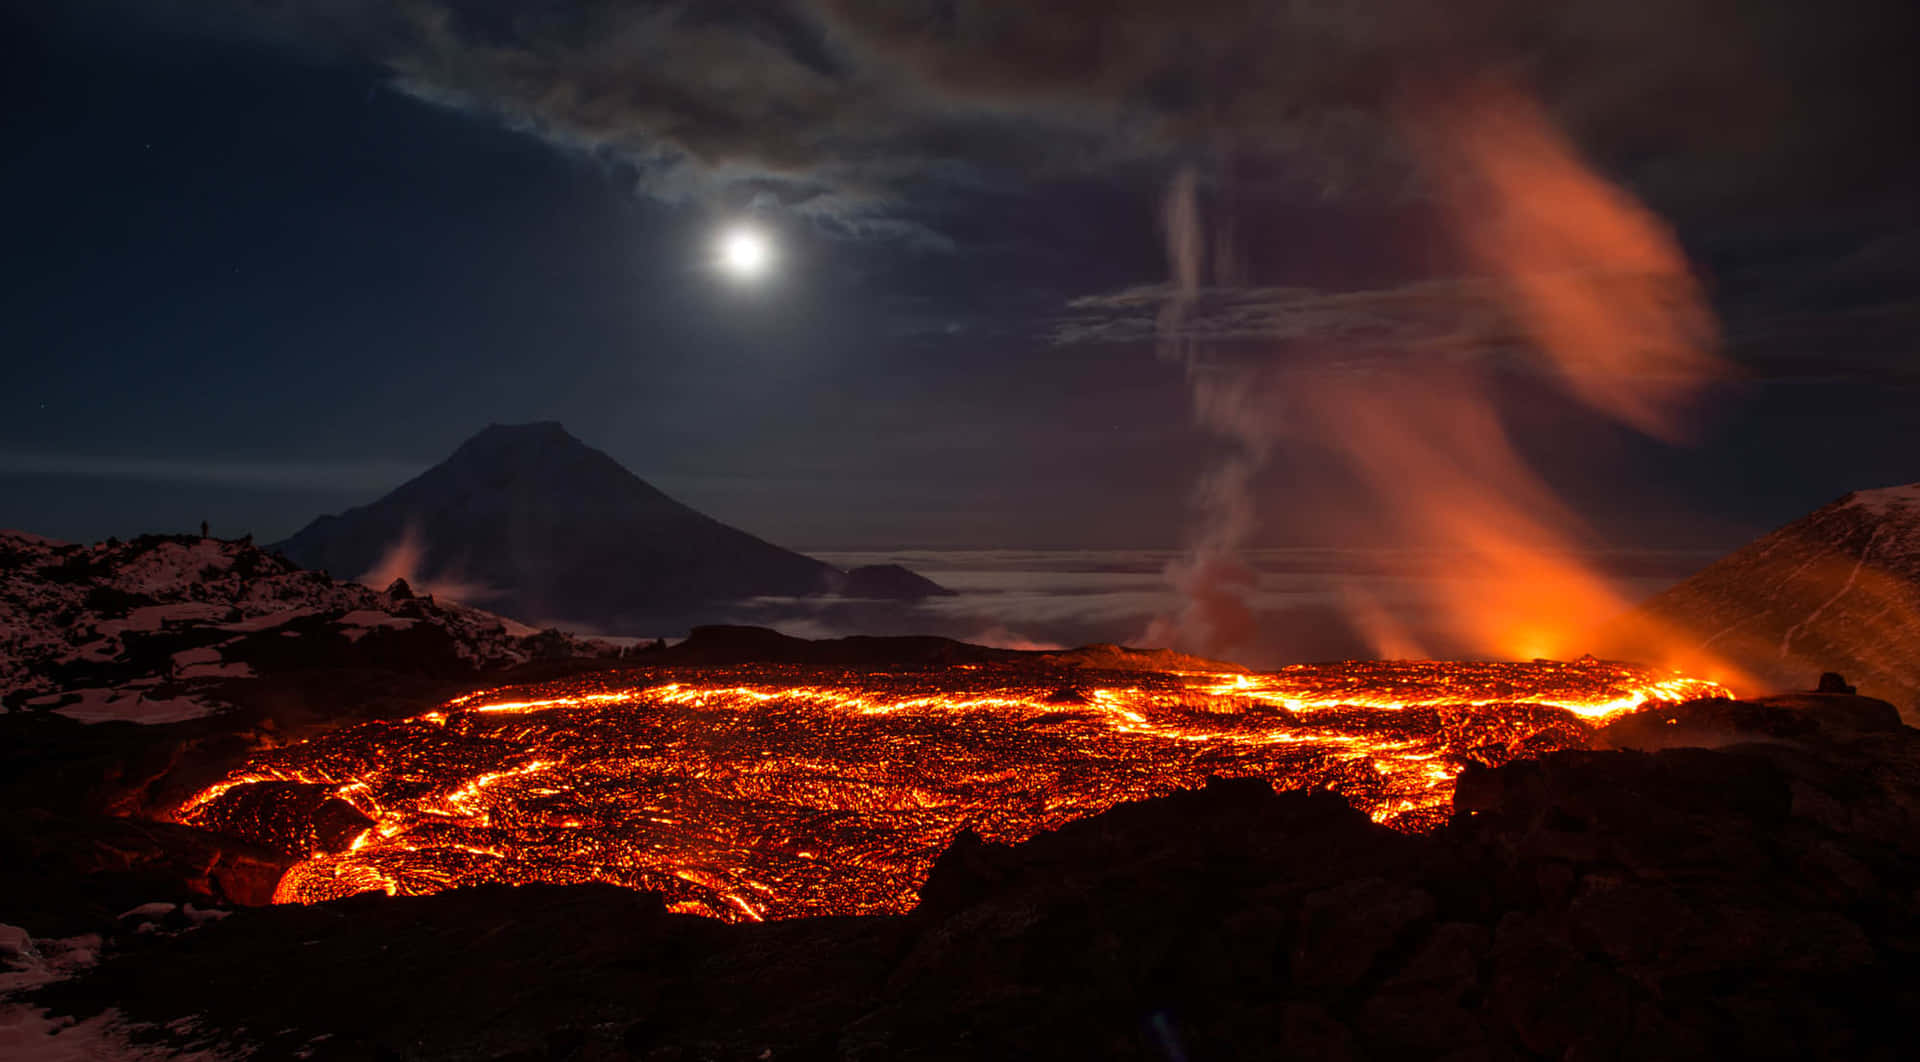 An Explosive Look at A Volcanic Eruption